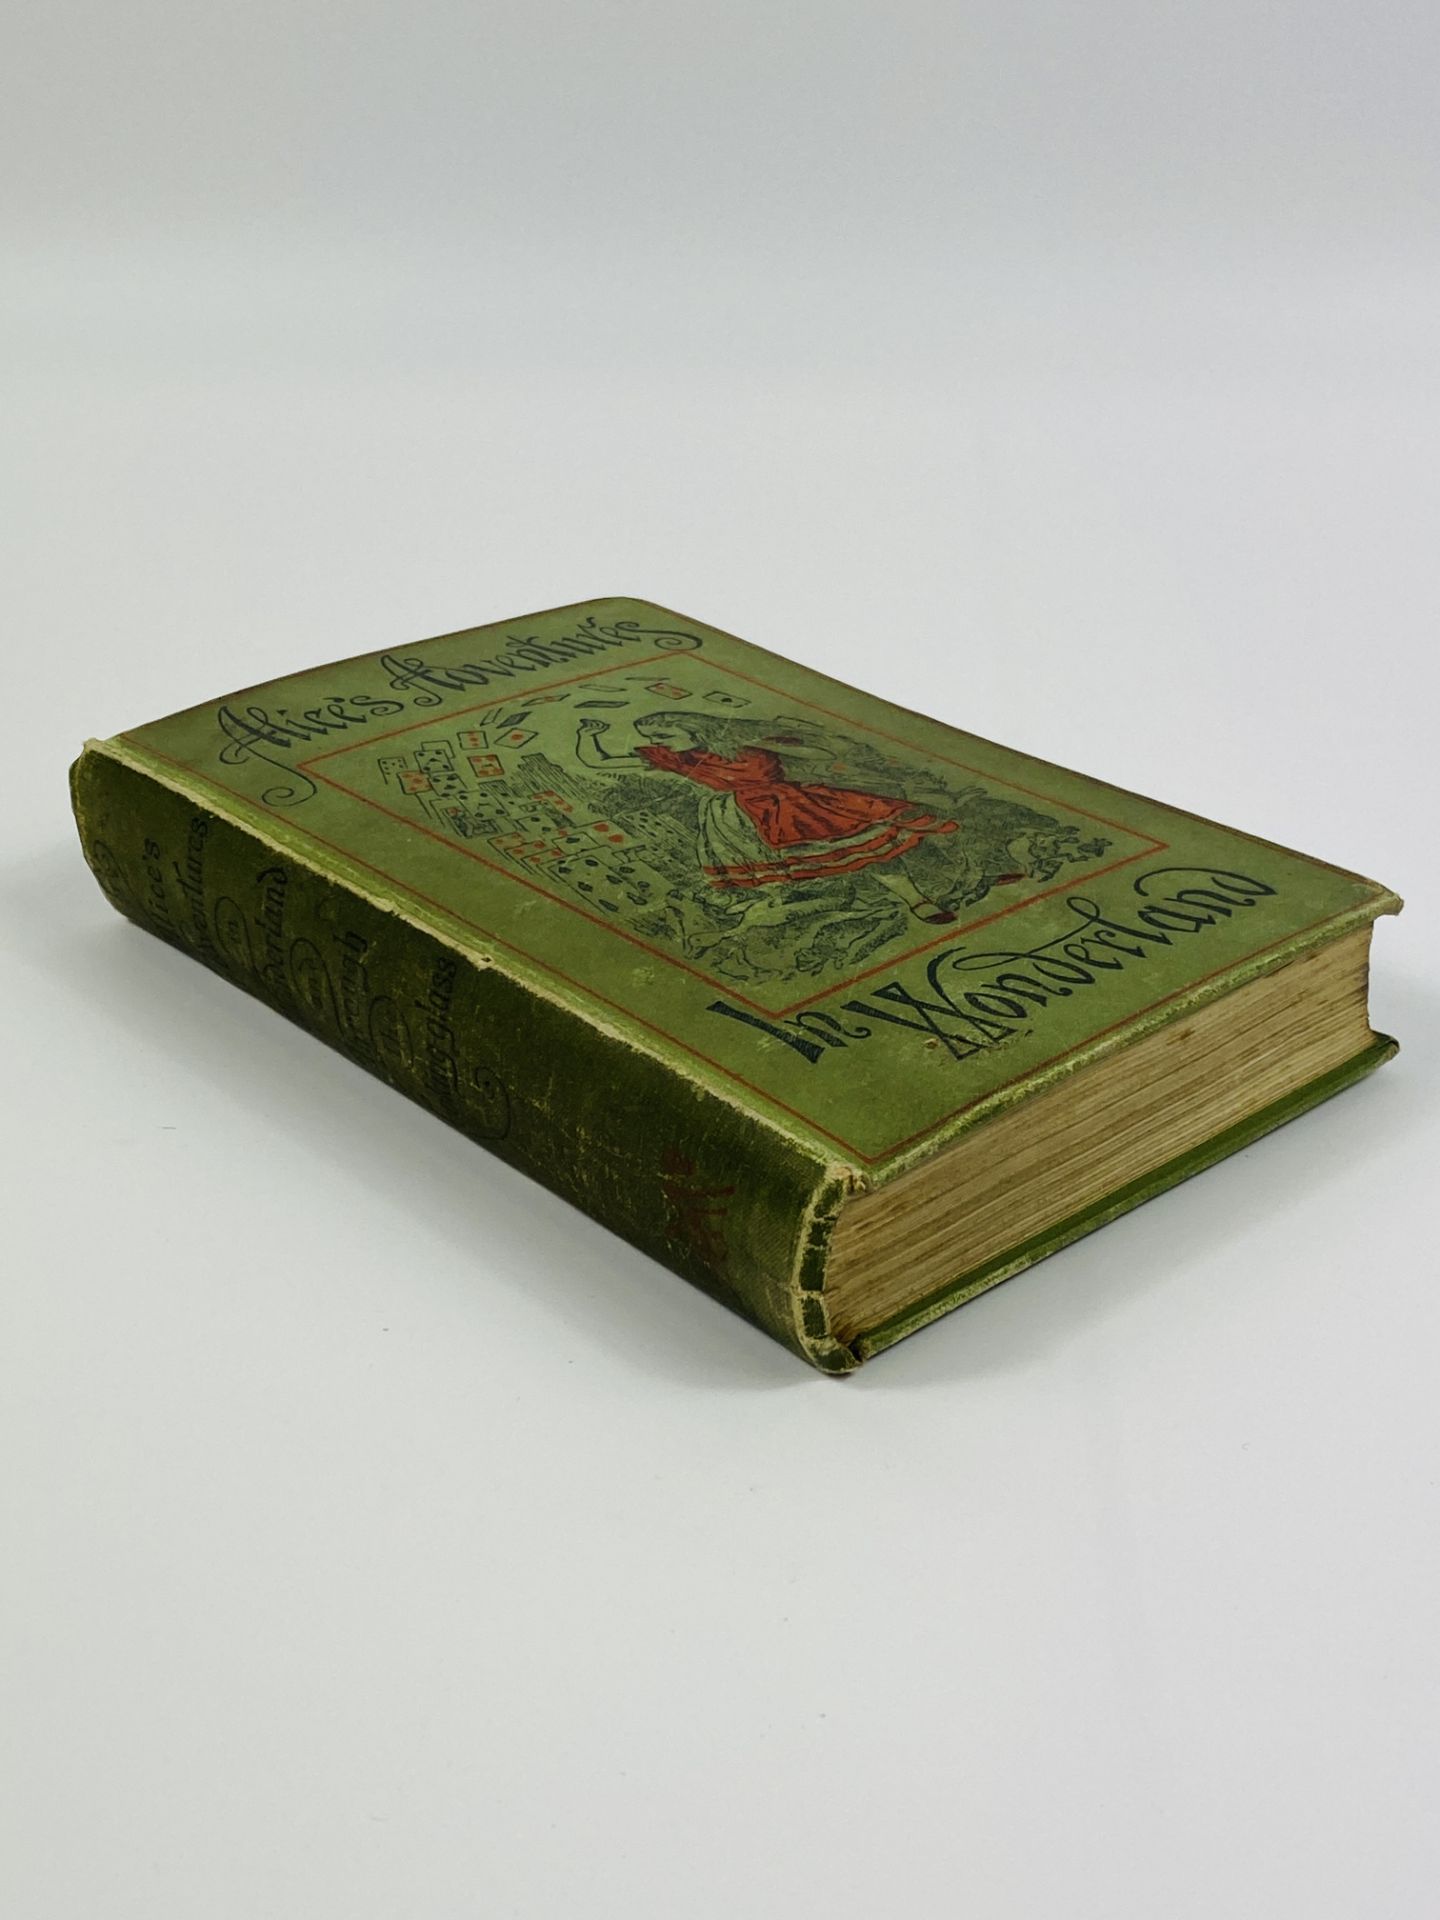 Alice's Adventures in Wonderland, Lewis Carroll, published MacMillan and Co, 1898 - Image 6 of 6